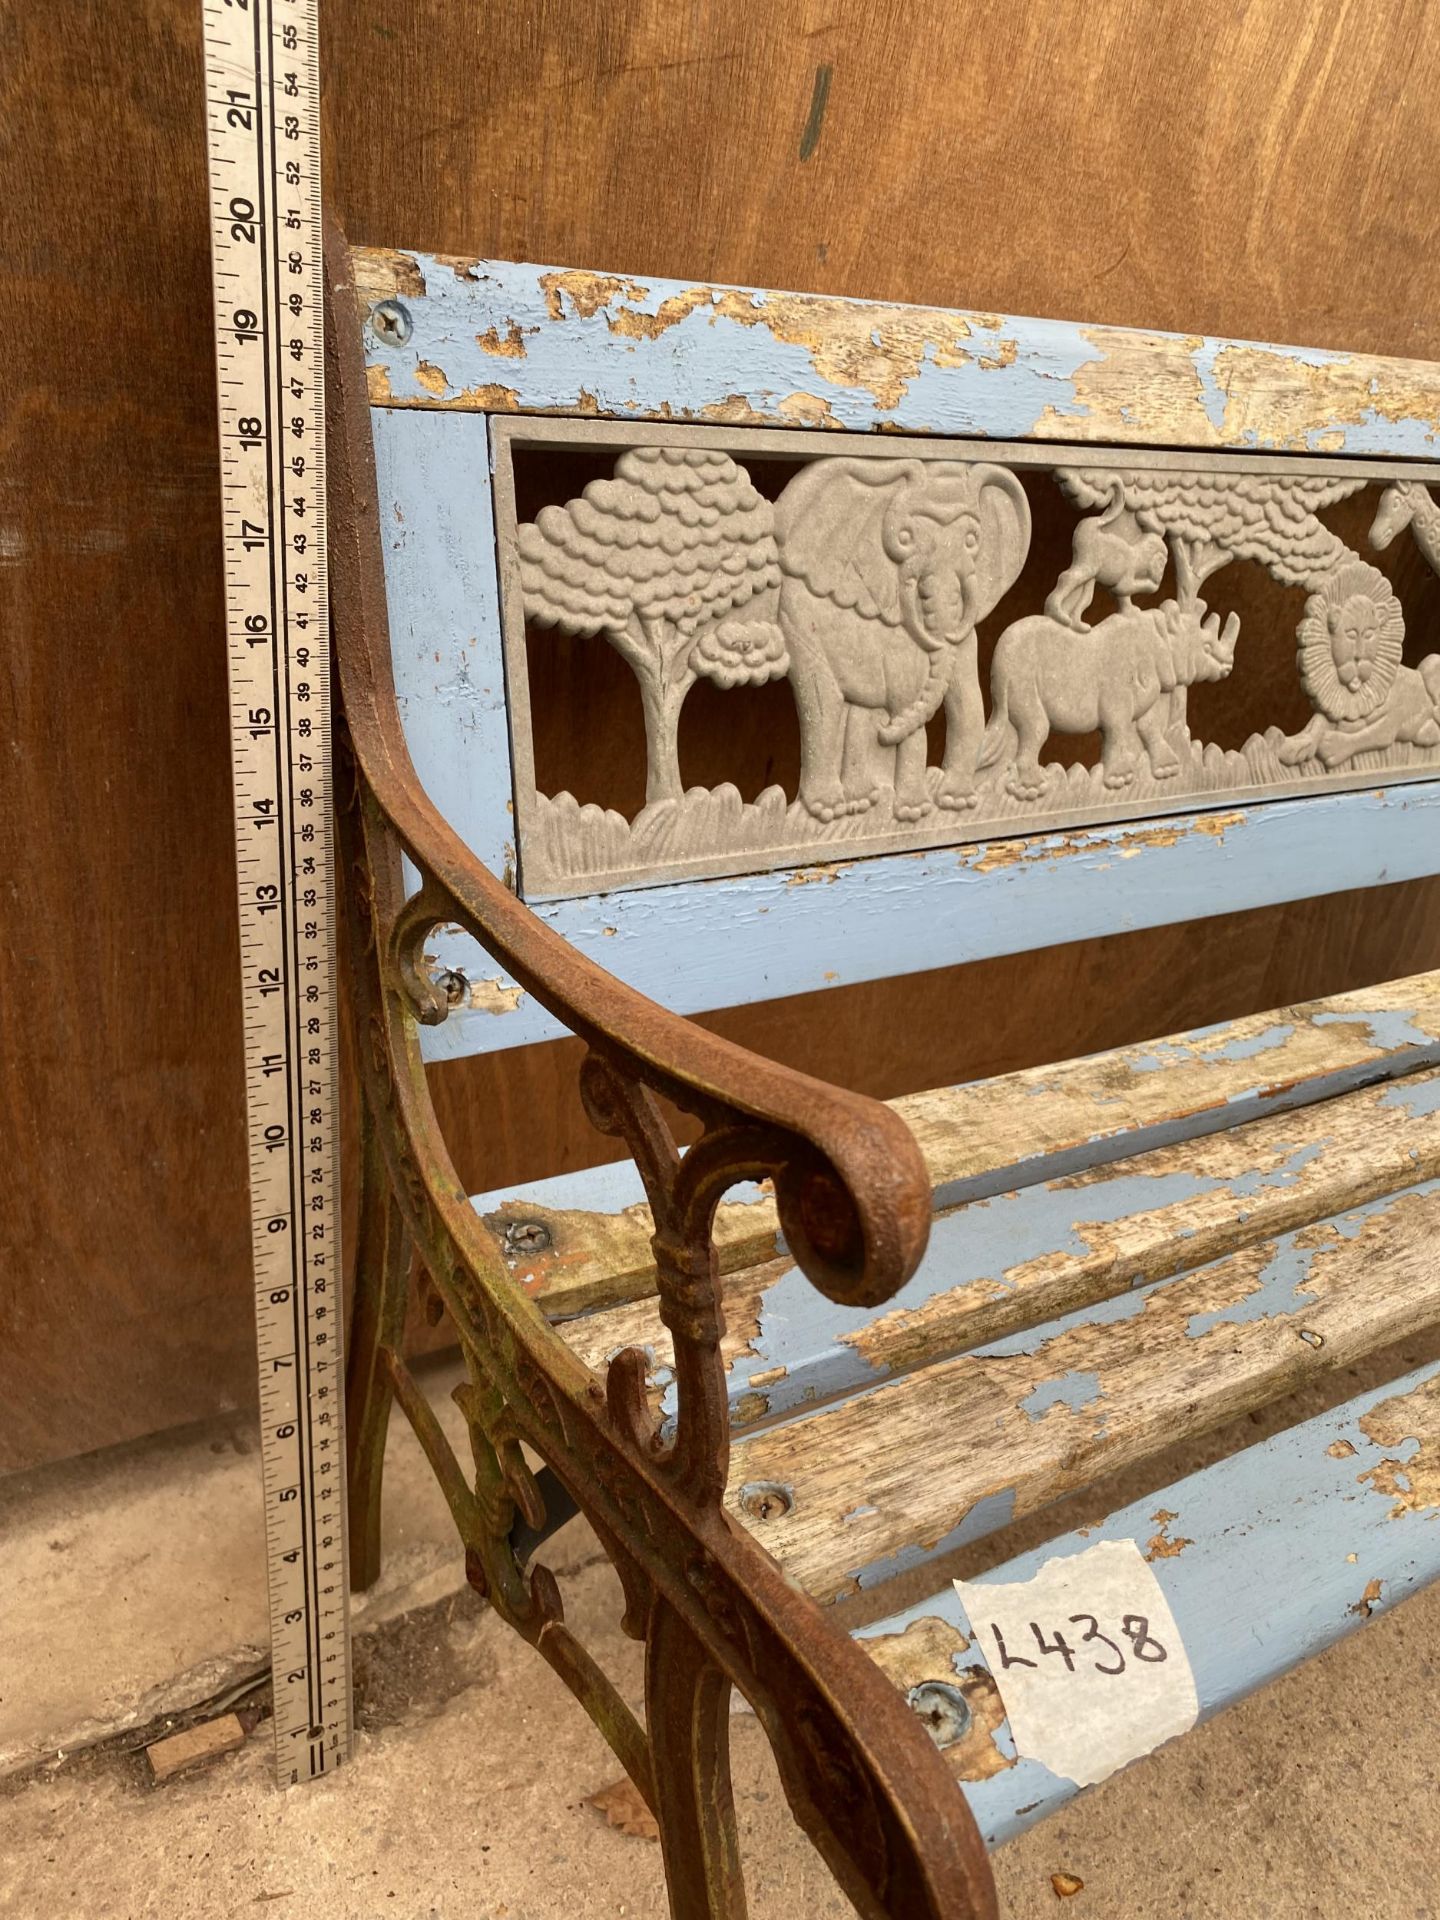 A SMALL WOODEN SLATTED CHILDRENS BENCH WITH CAST ENDS AND PLASTIC SAFARI BACK - Image 4 of 4